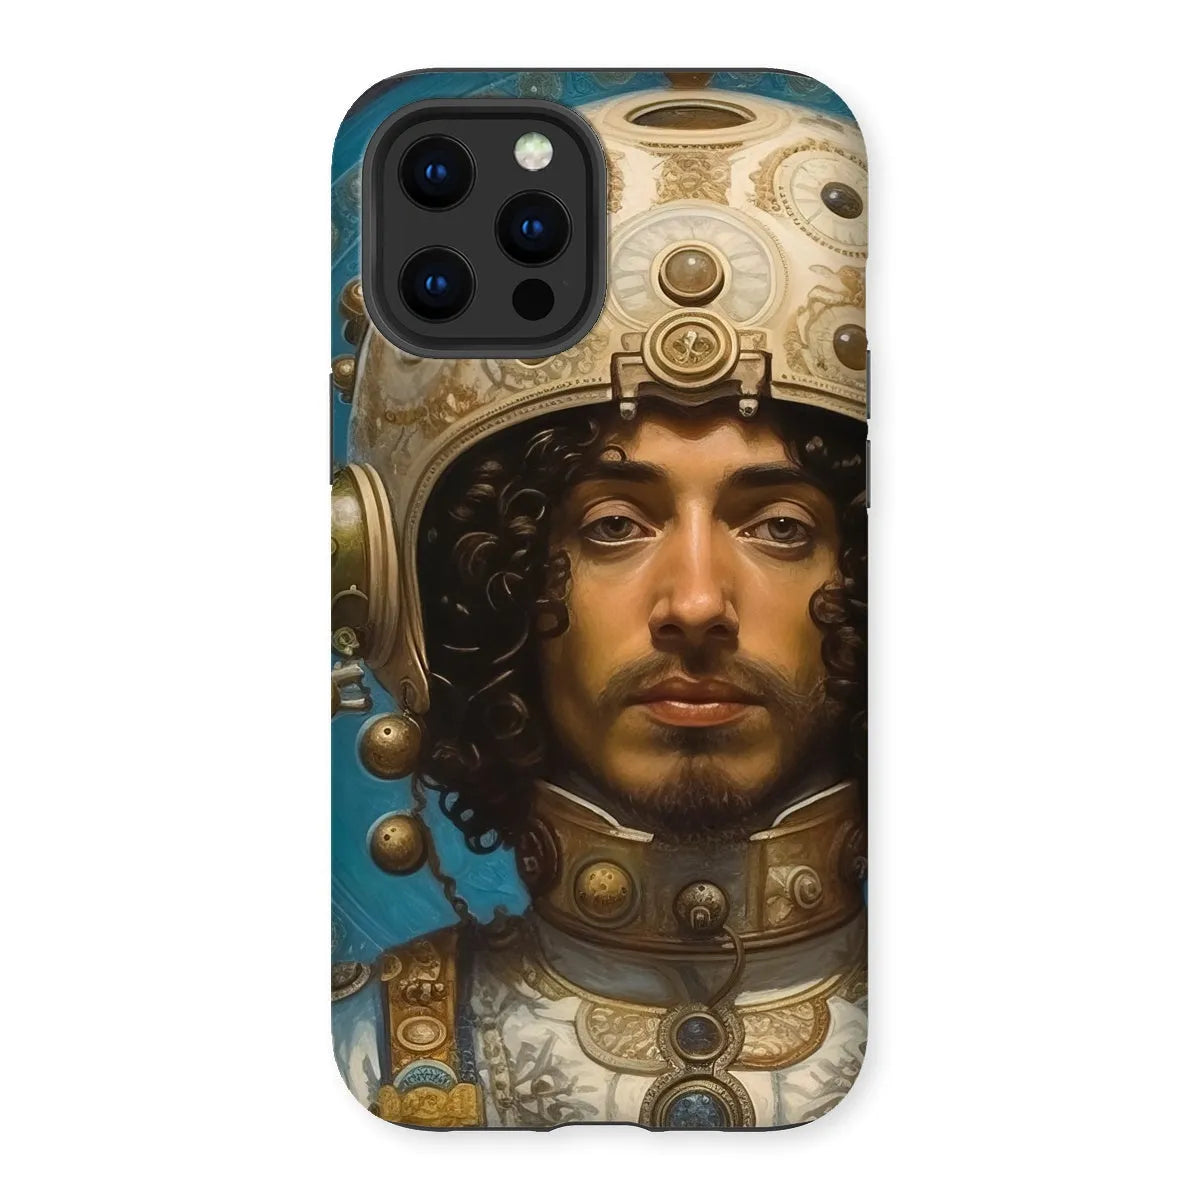 Mehdi The Gay Astronaut - Lgbtq Art Phone Case - Iphone 12 Pro Max / Matte - Mobile Phone Cases - Aesthetic Art